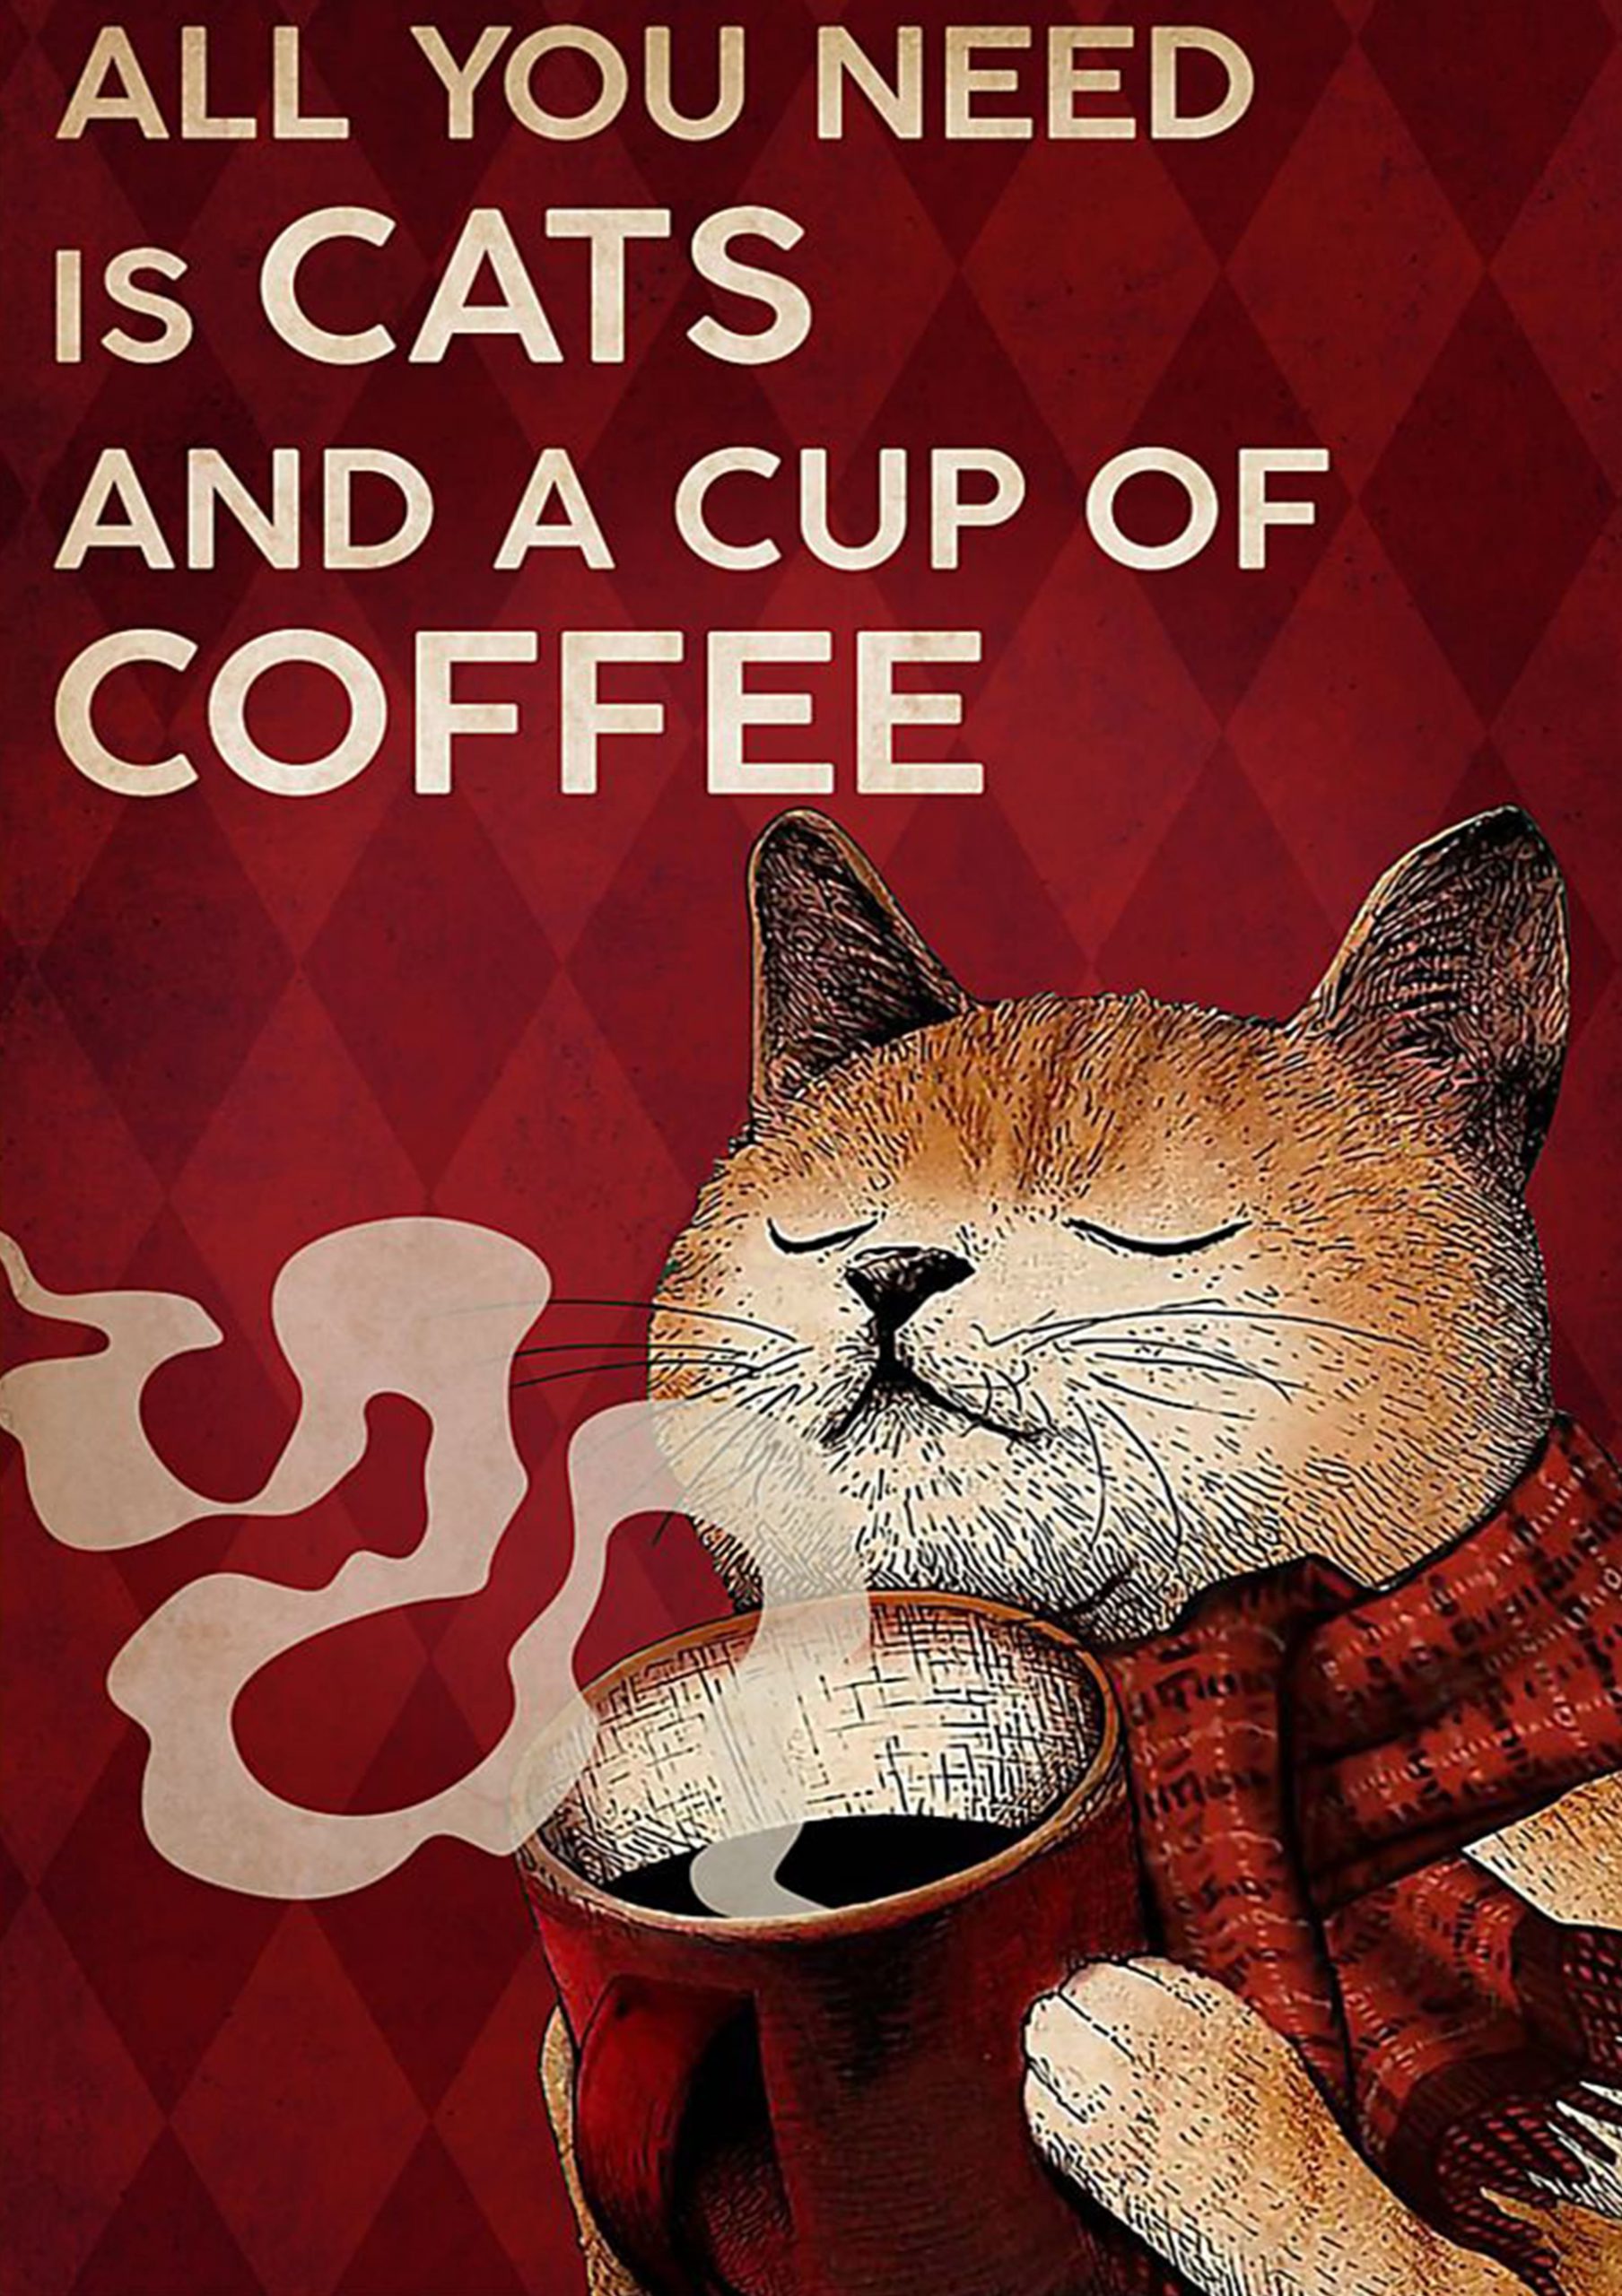 vintage all you need is cats and a cup of coffee poster 1 - Copy (3)